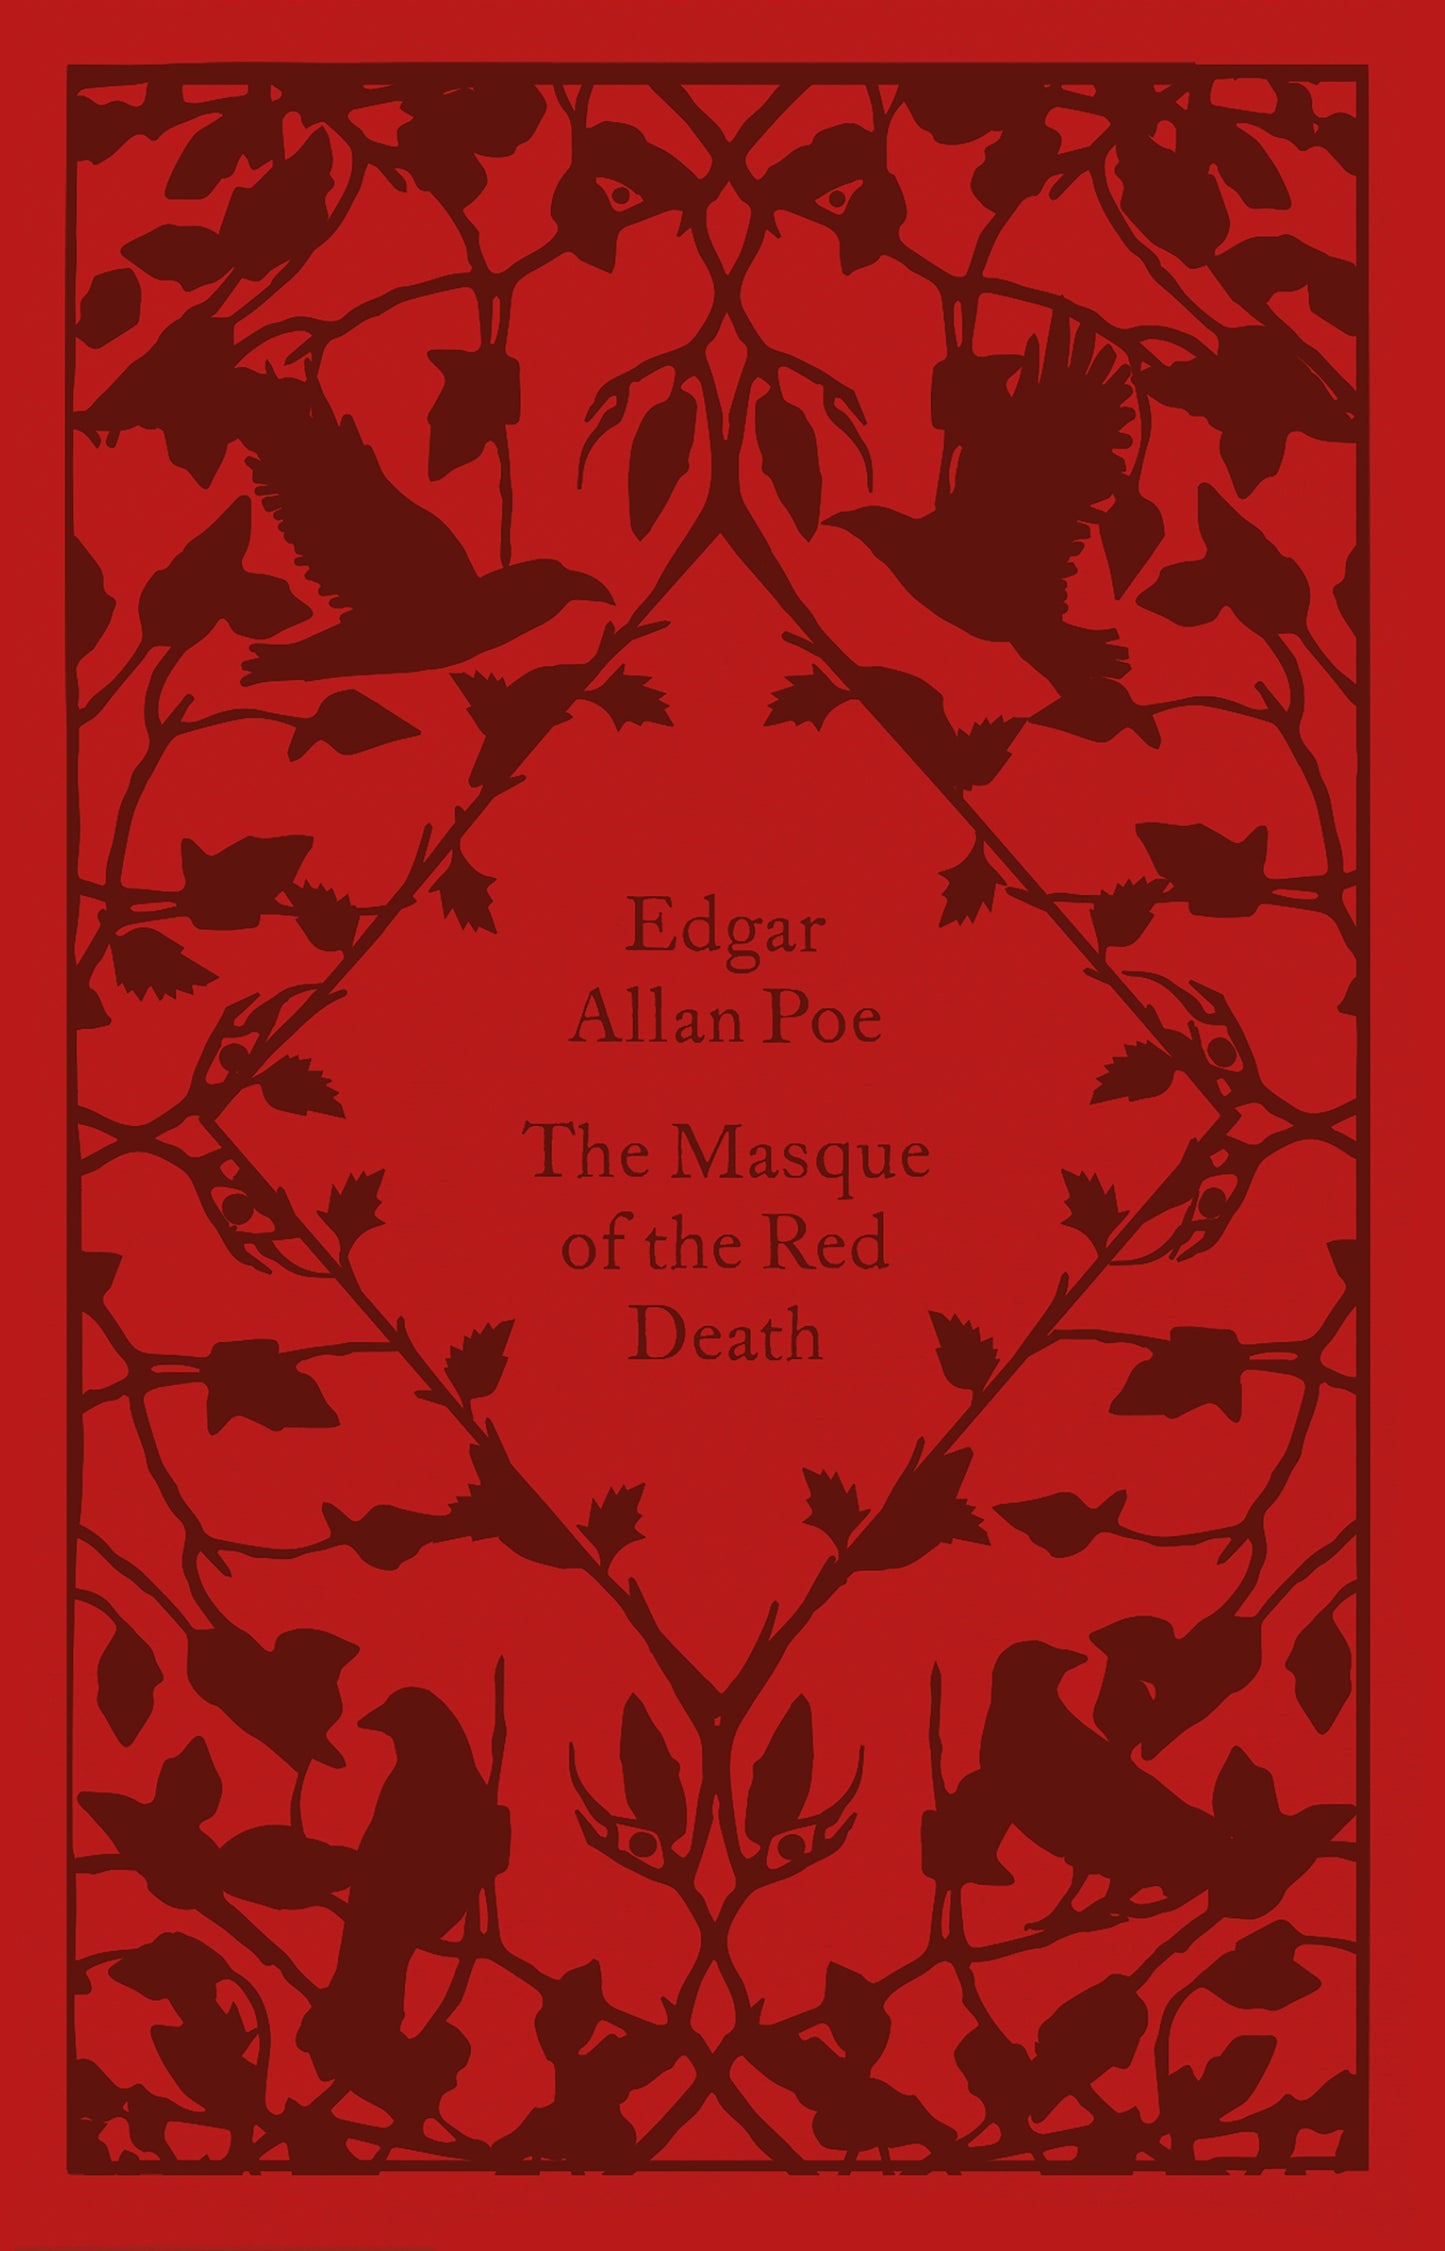 The Masque of the Red Death -	Edgar Allan Poe